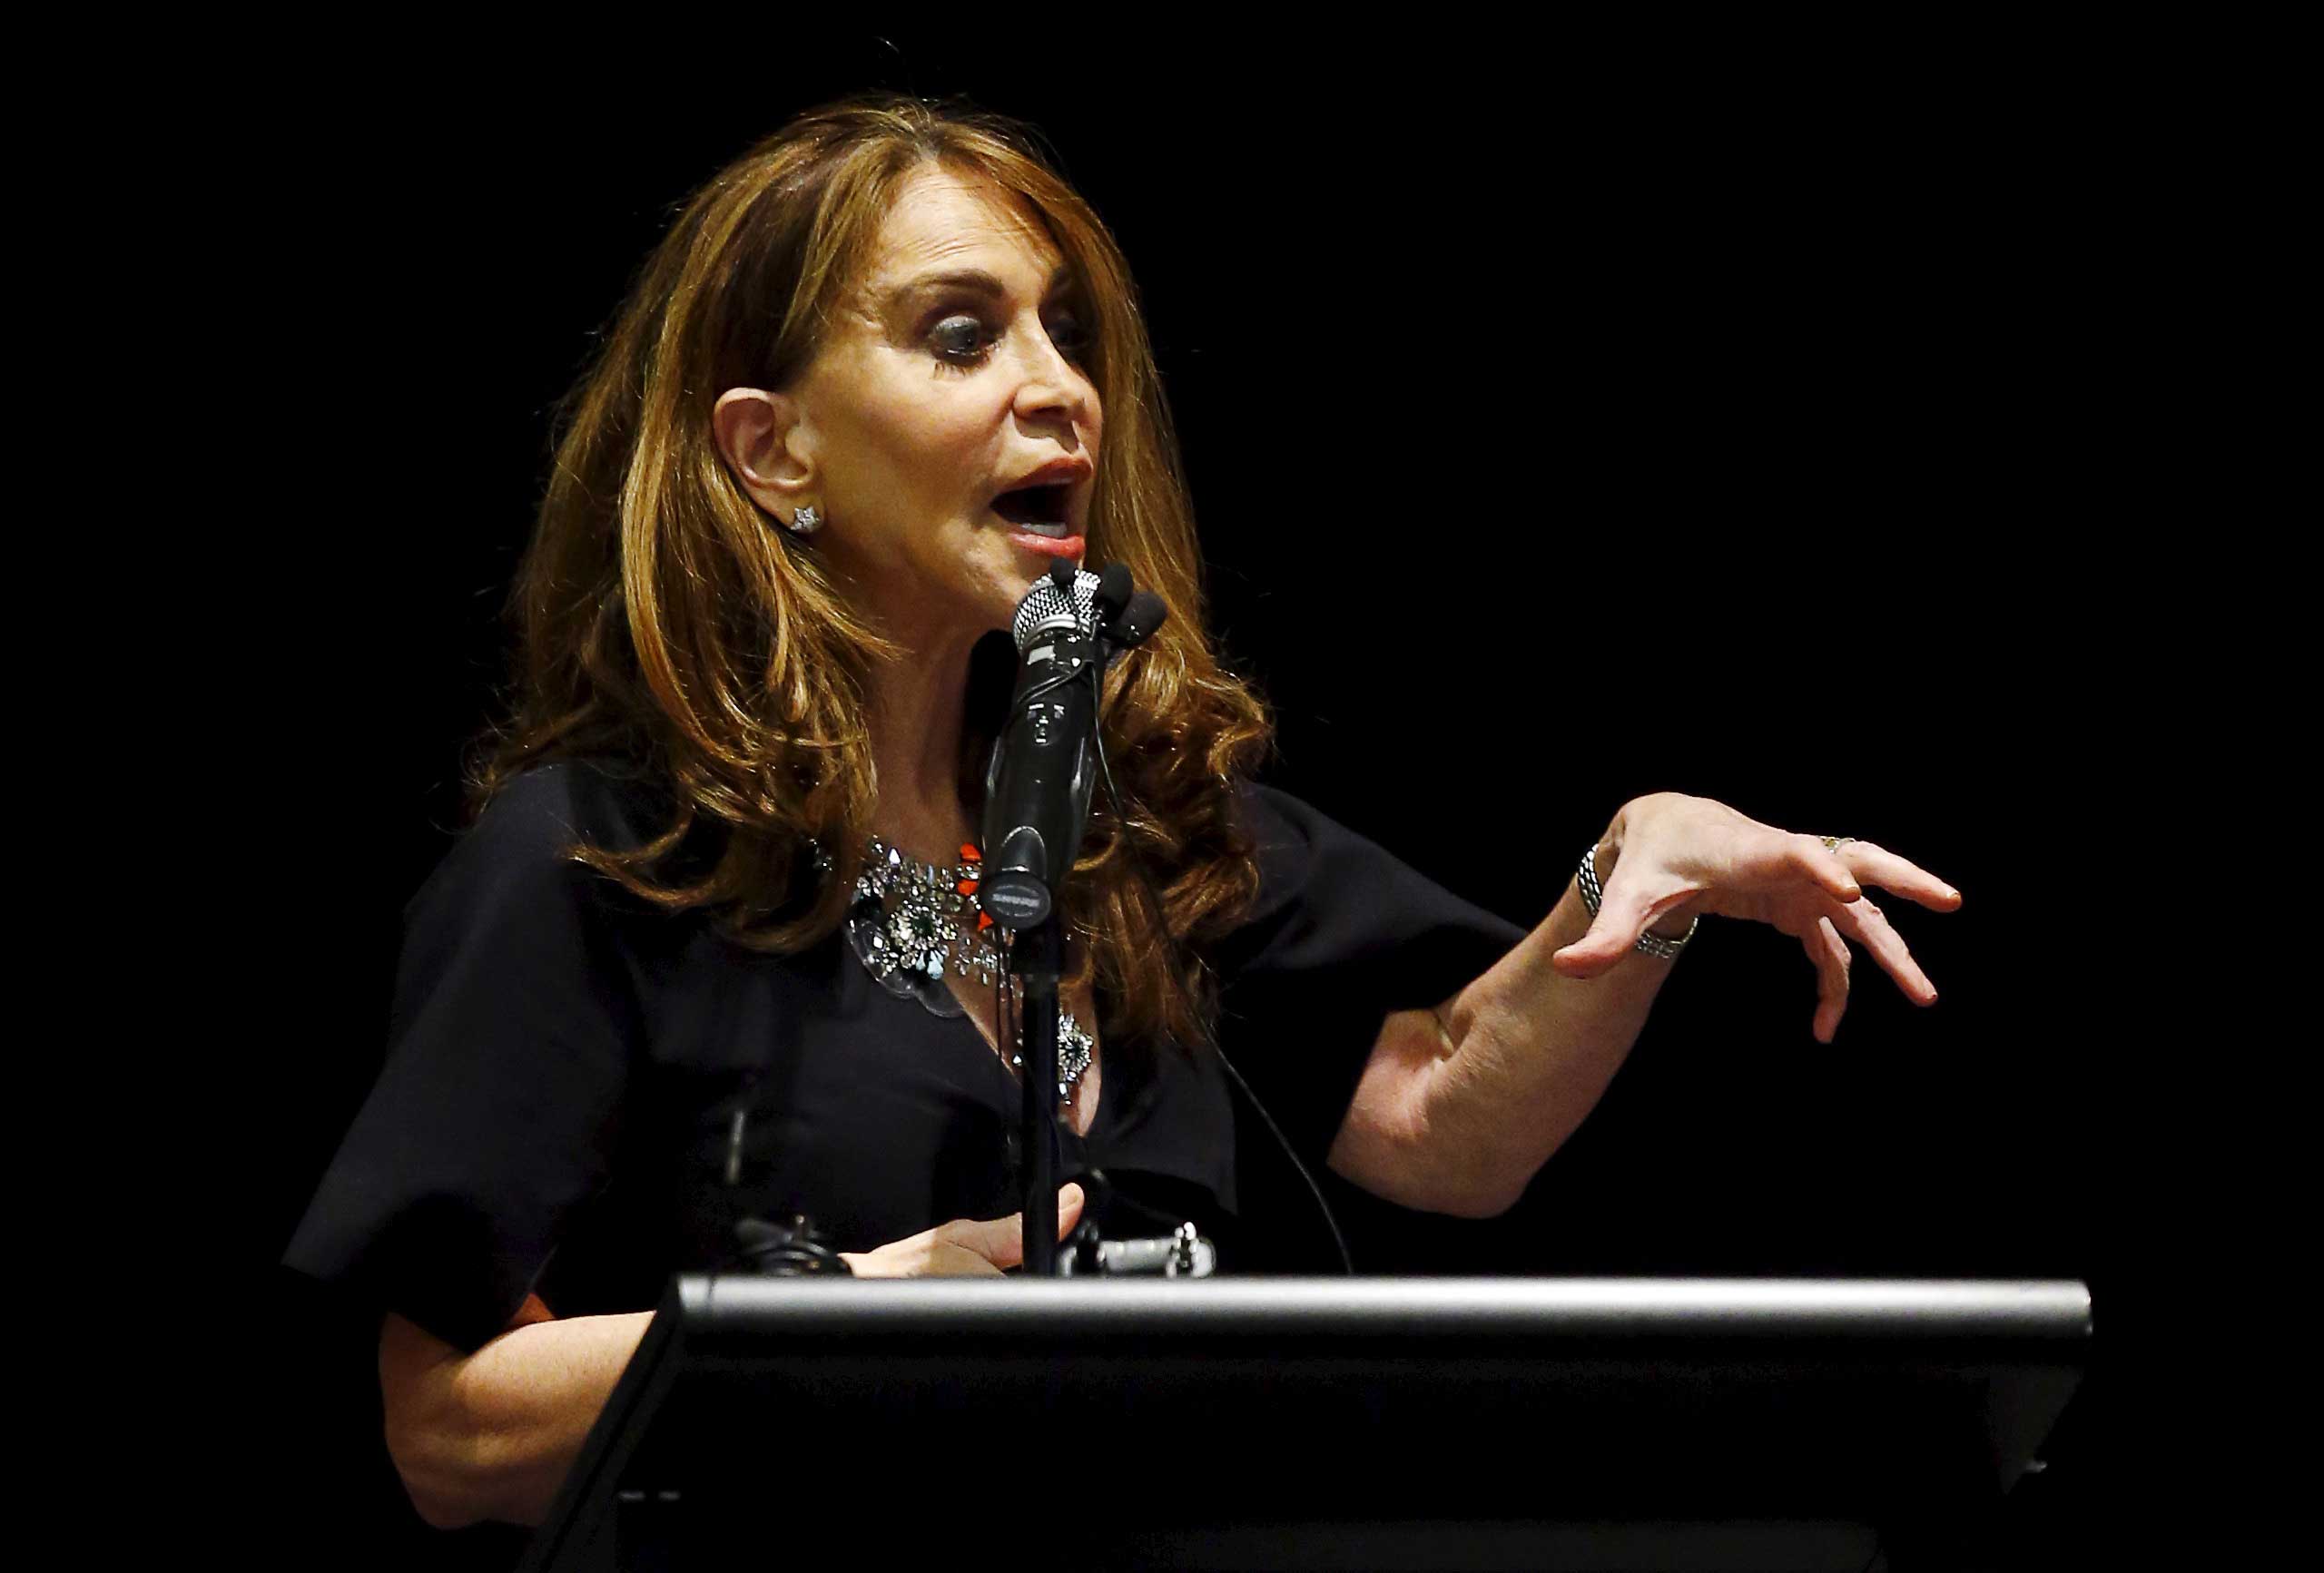 Political blogger Pamela Geller, American Freedom Defense Initiative's Houston-based founder, speaks at the Muhammad Art Exhibit and Contest, which is sponsored by the American Freedom Defense Initiative, in Garland, Texas May 3, 2015. (Mike Stone—Reuters)